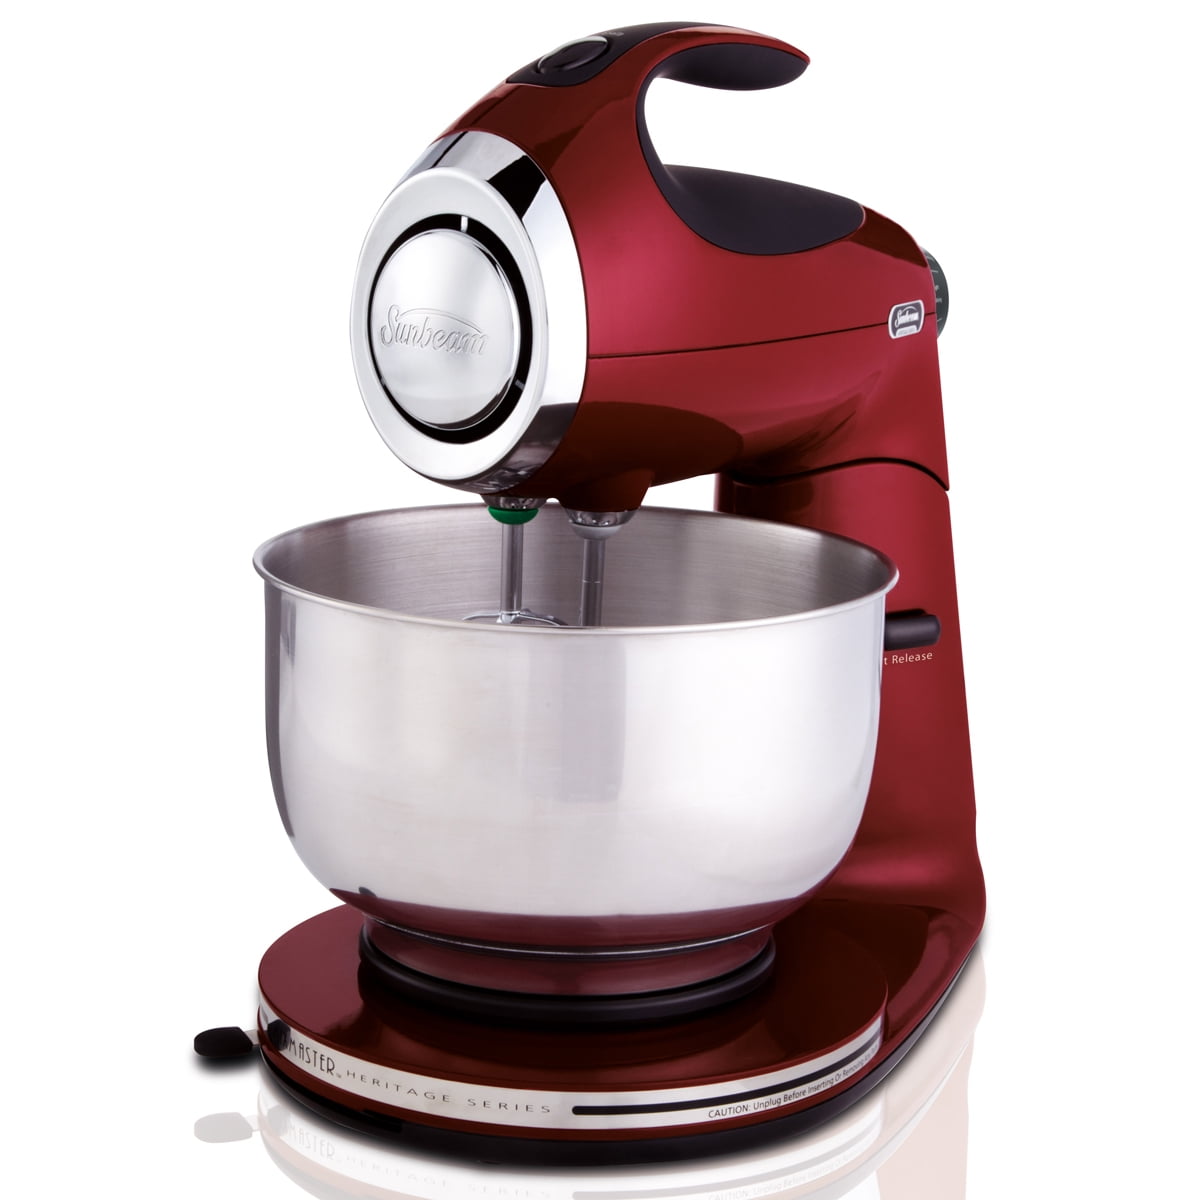 Sunbeam Mixmaster Heritage 2346 Series Stand Mixer with Bowls